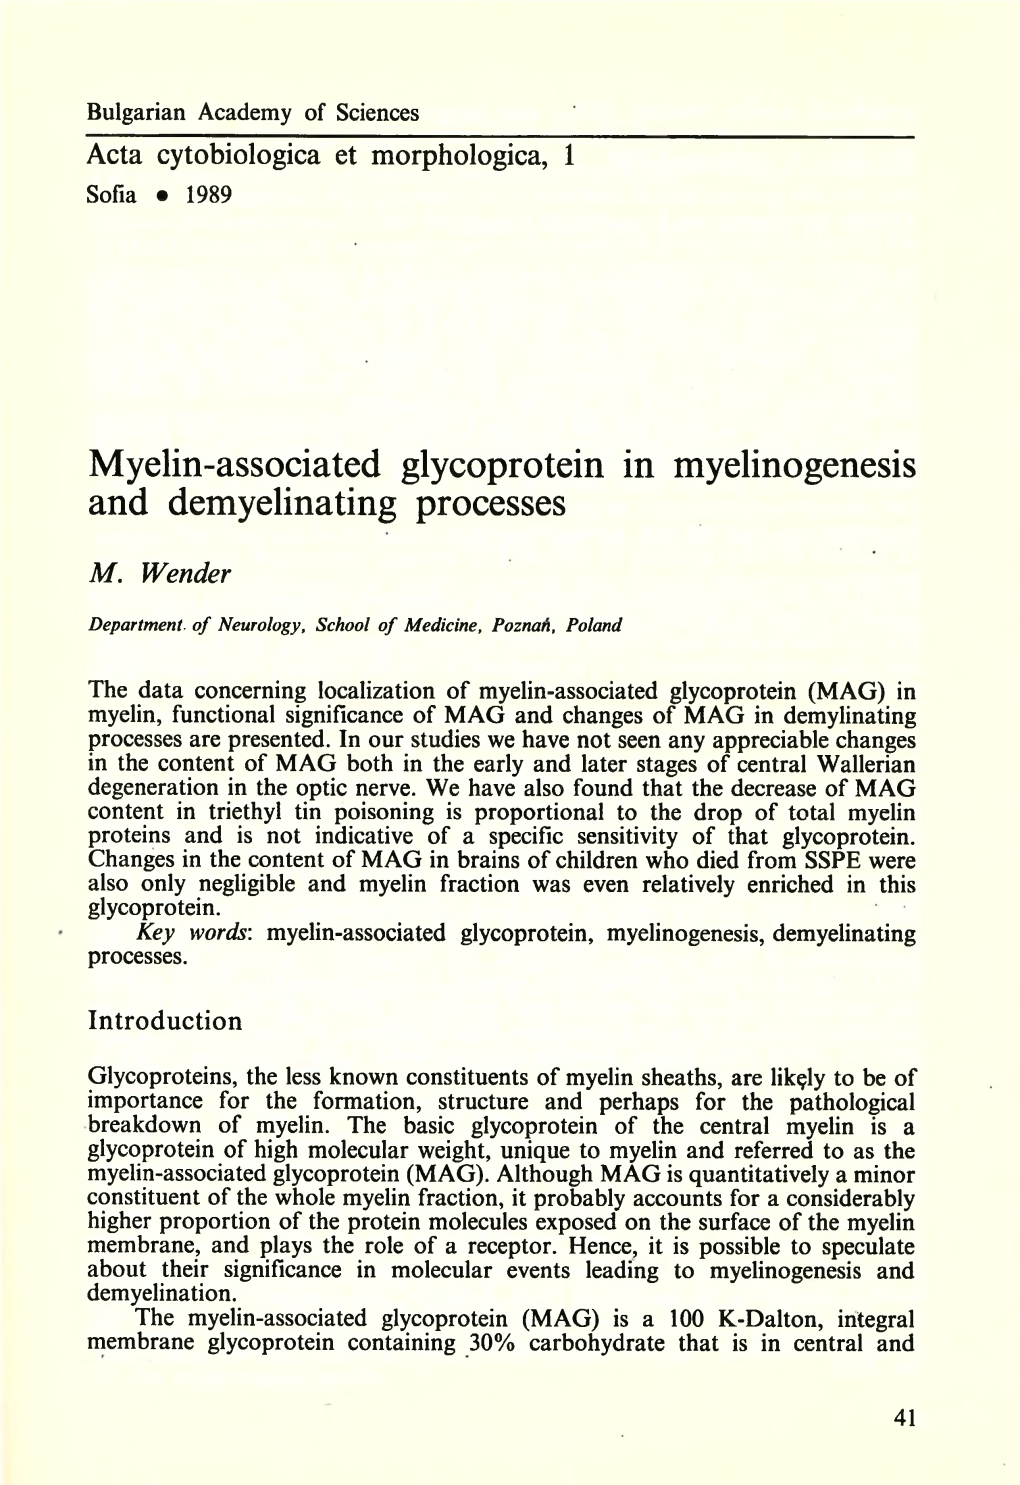 Myelin-Associated Glycoprotein in Myelinogenesis and Demyelinating Processes